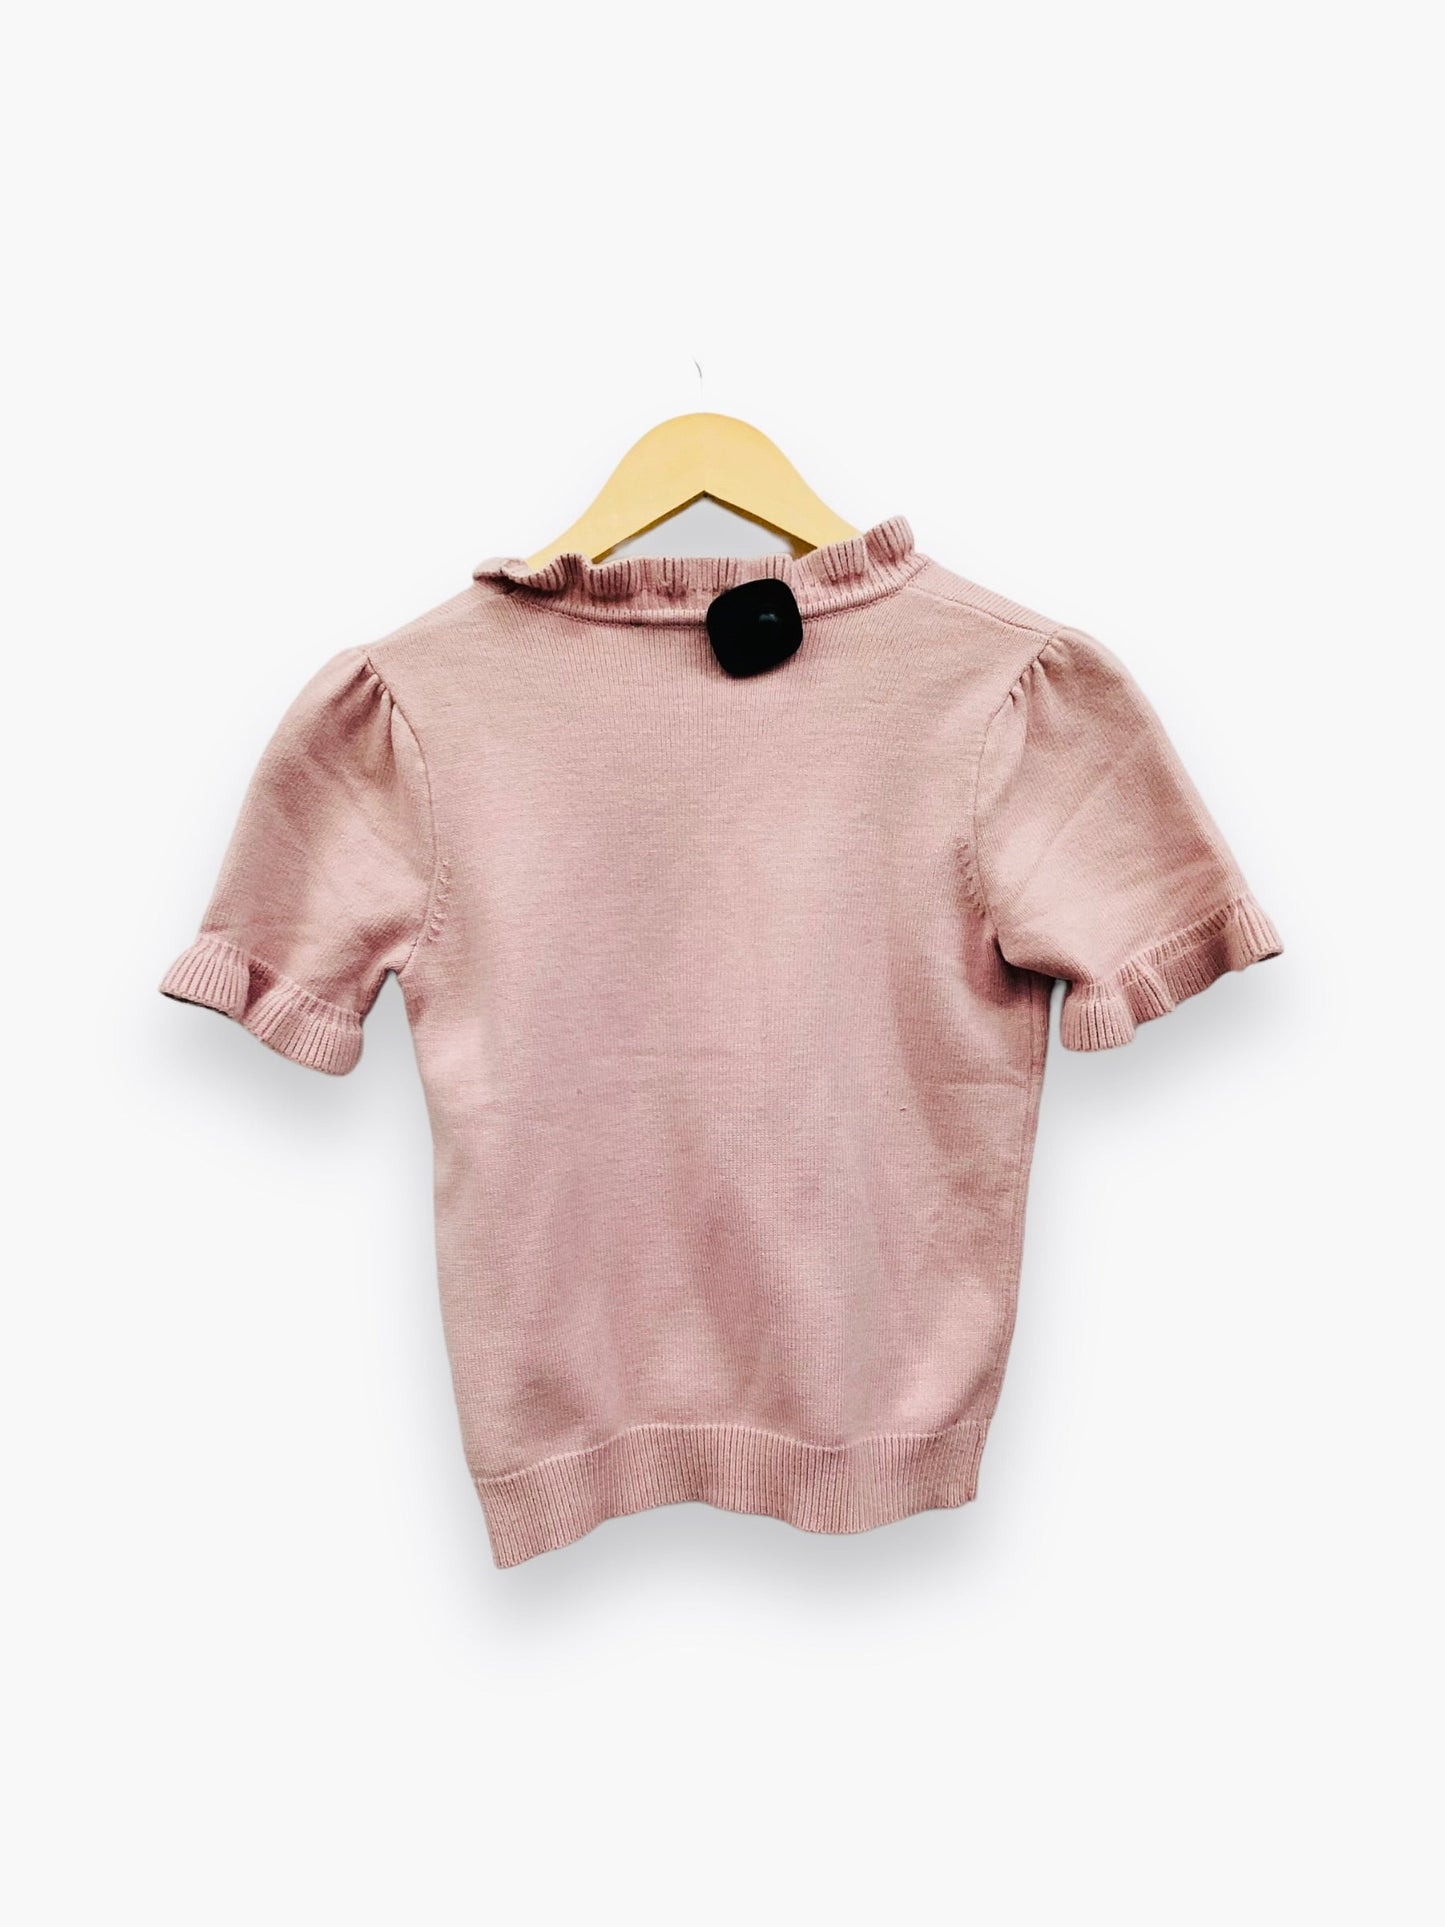 Pink Sweater Premise, Size S